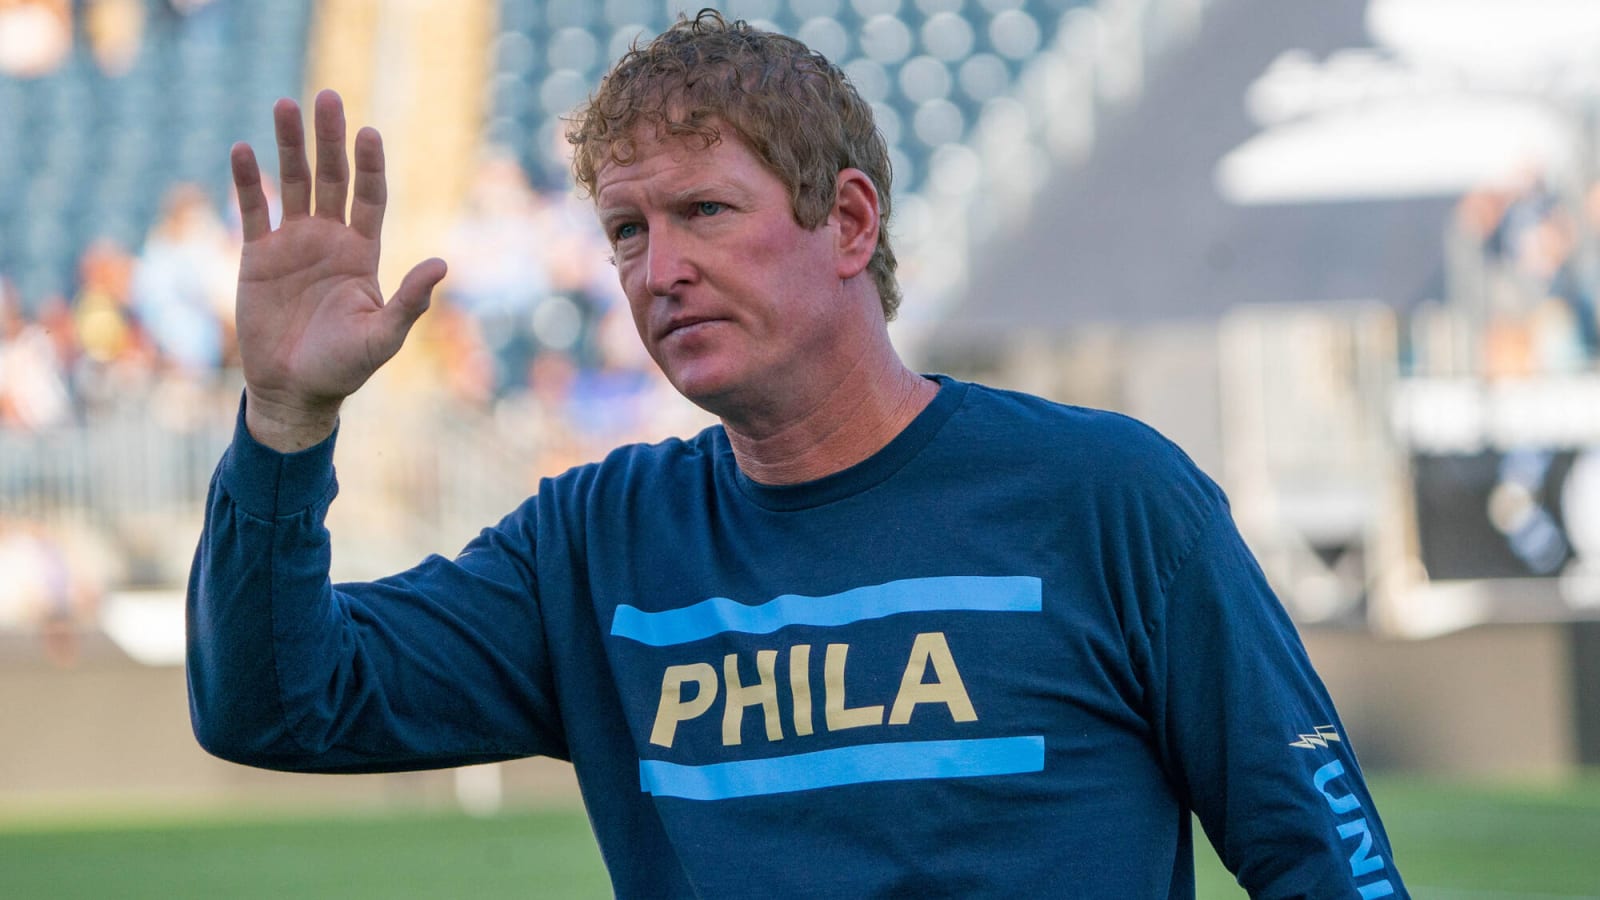 Union Presser Round-Up: Jim Curtin Previews Columbus Crew – Injury updates, load management, grinding through slumps, and a change in expectations